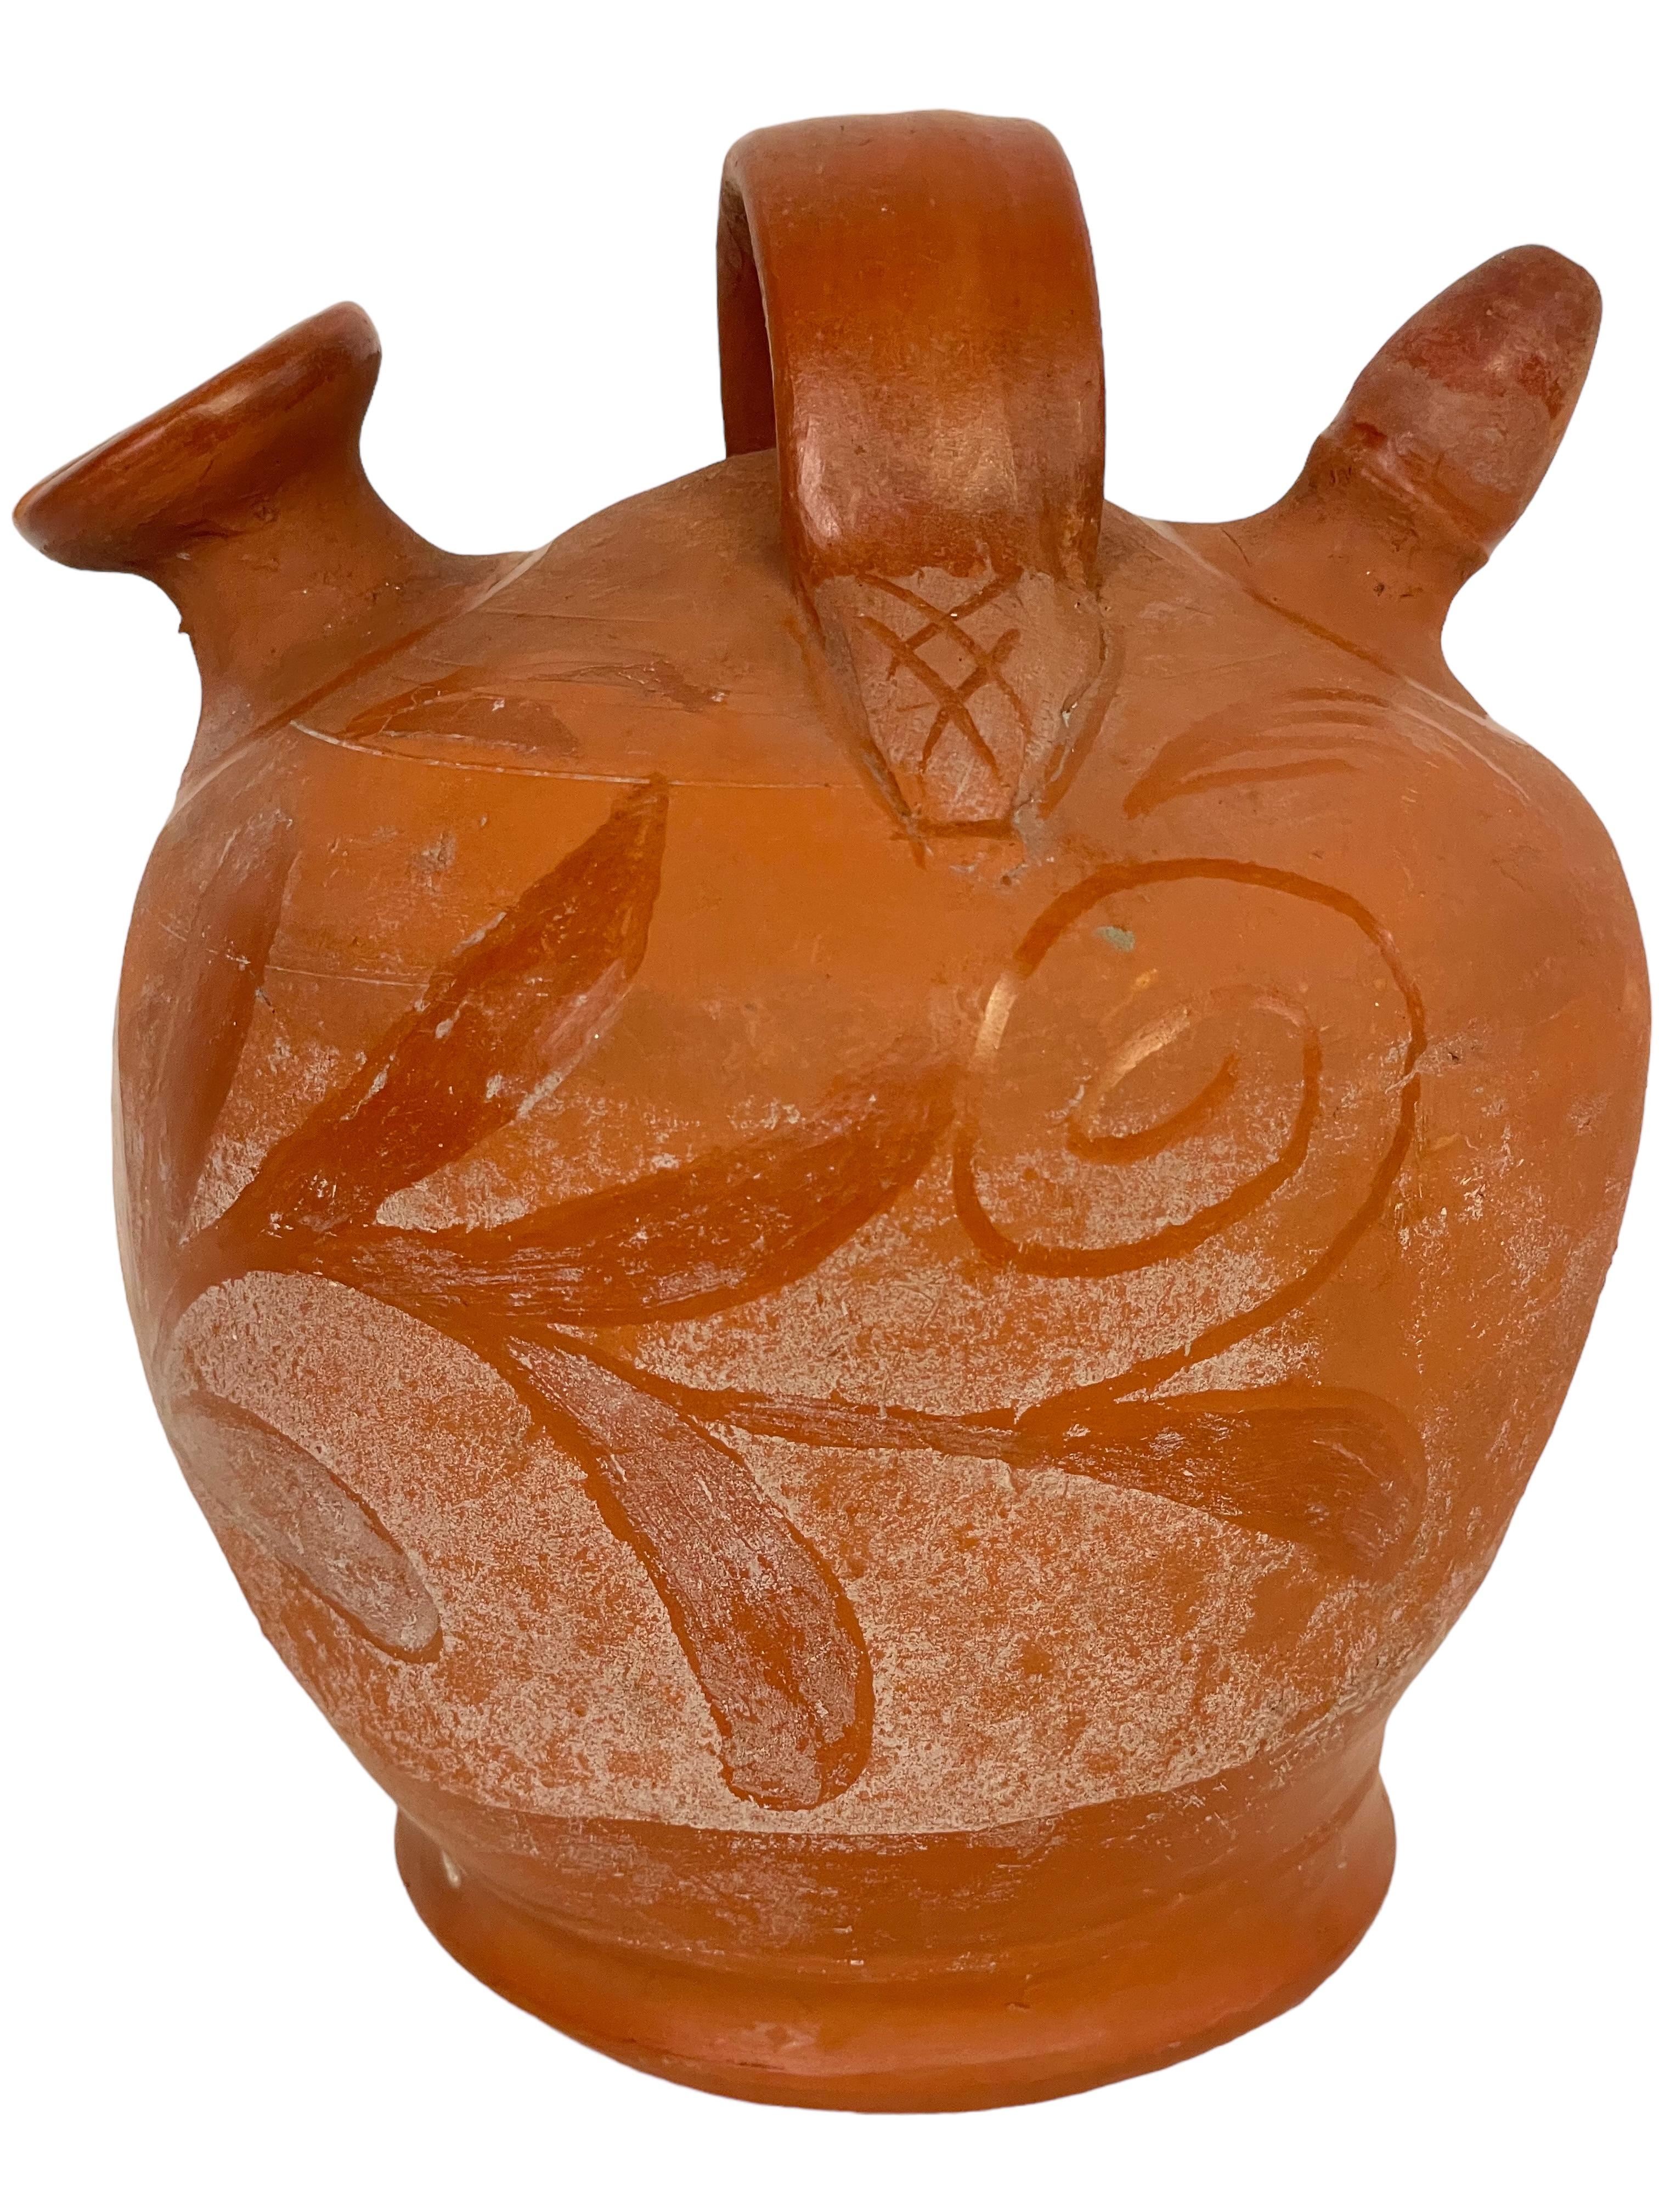 This handmade terracotta 'botijo' is a traditional unglazed Spanish jug, the ancient and ingenious design of which has been perfected over centuries for the cooling and serving of fresh drinking water. Shaped in the time-honoured way, with a gently